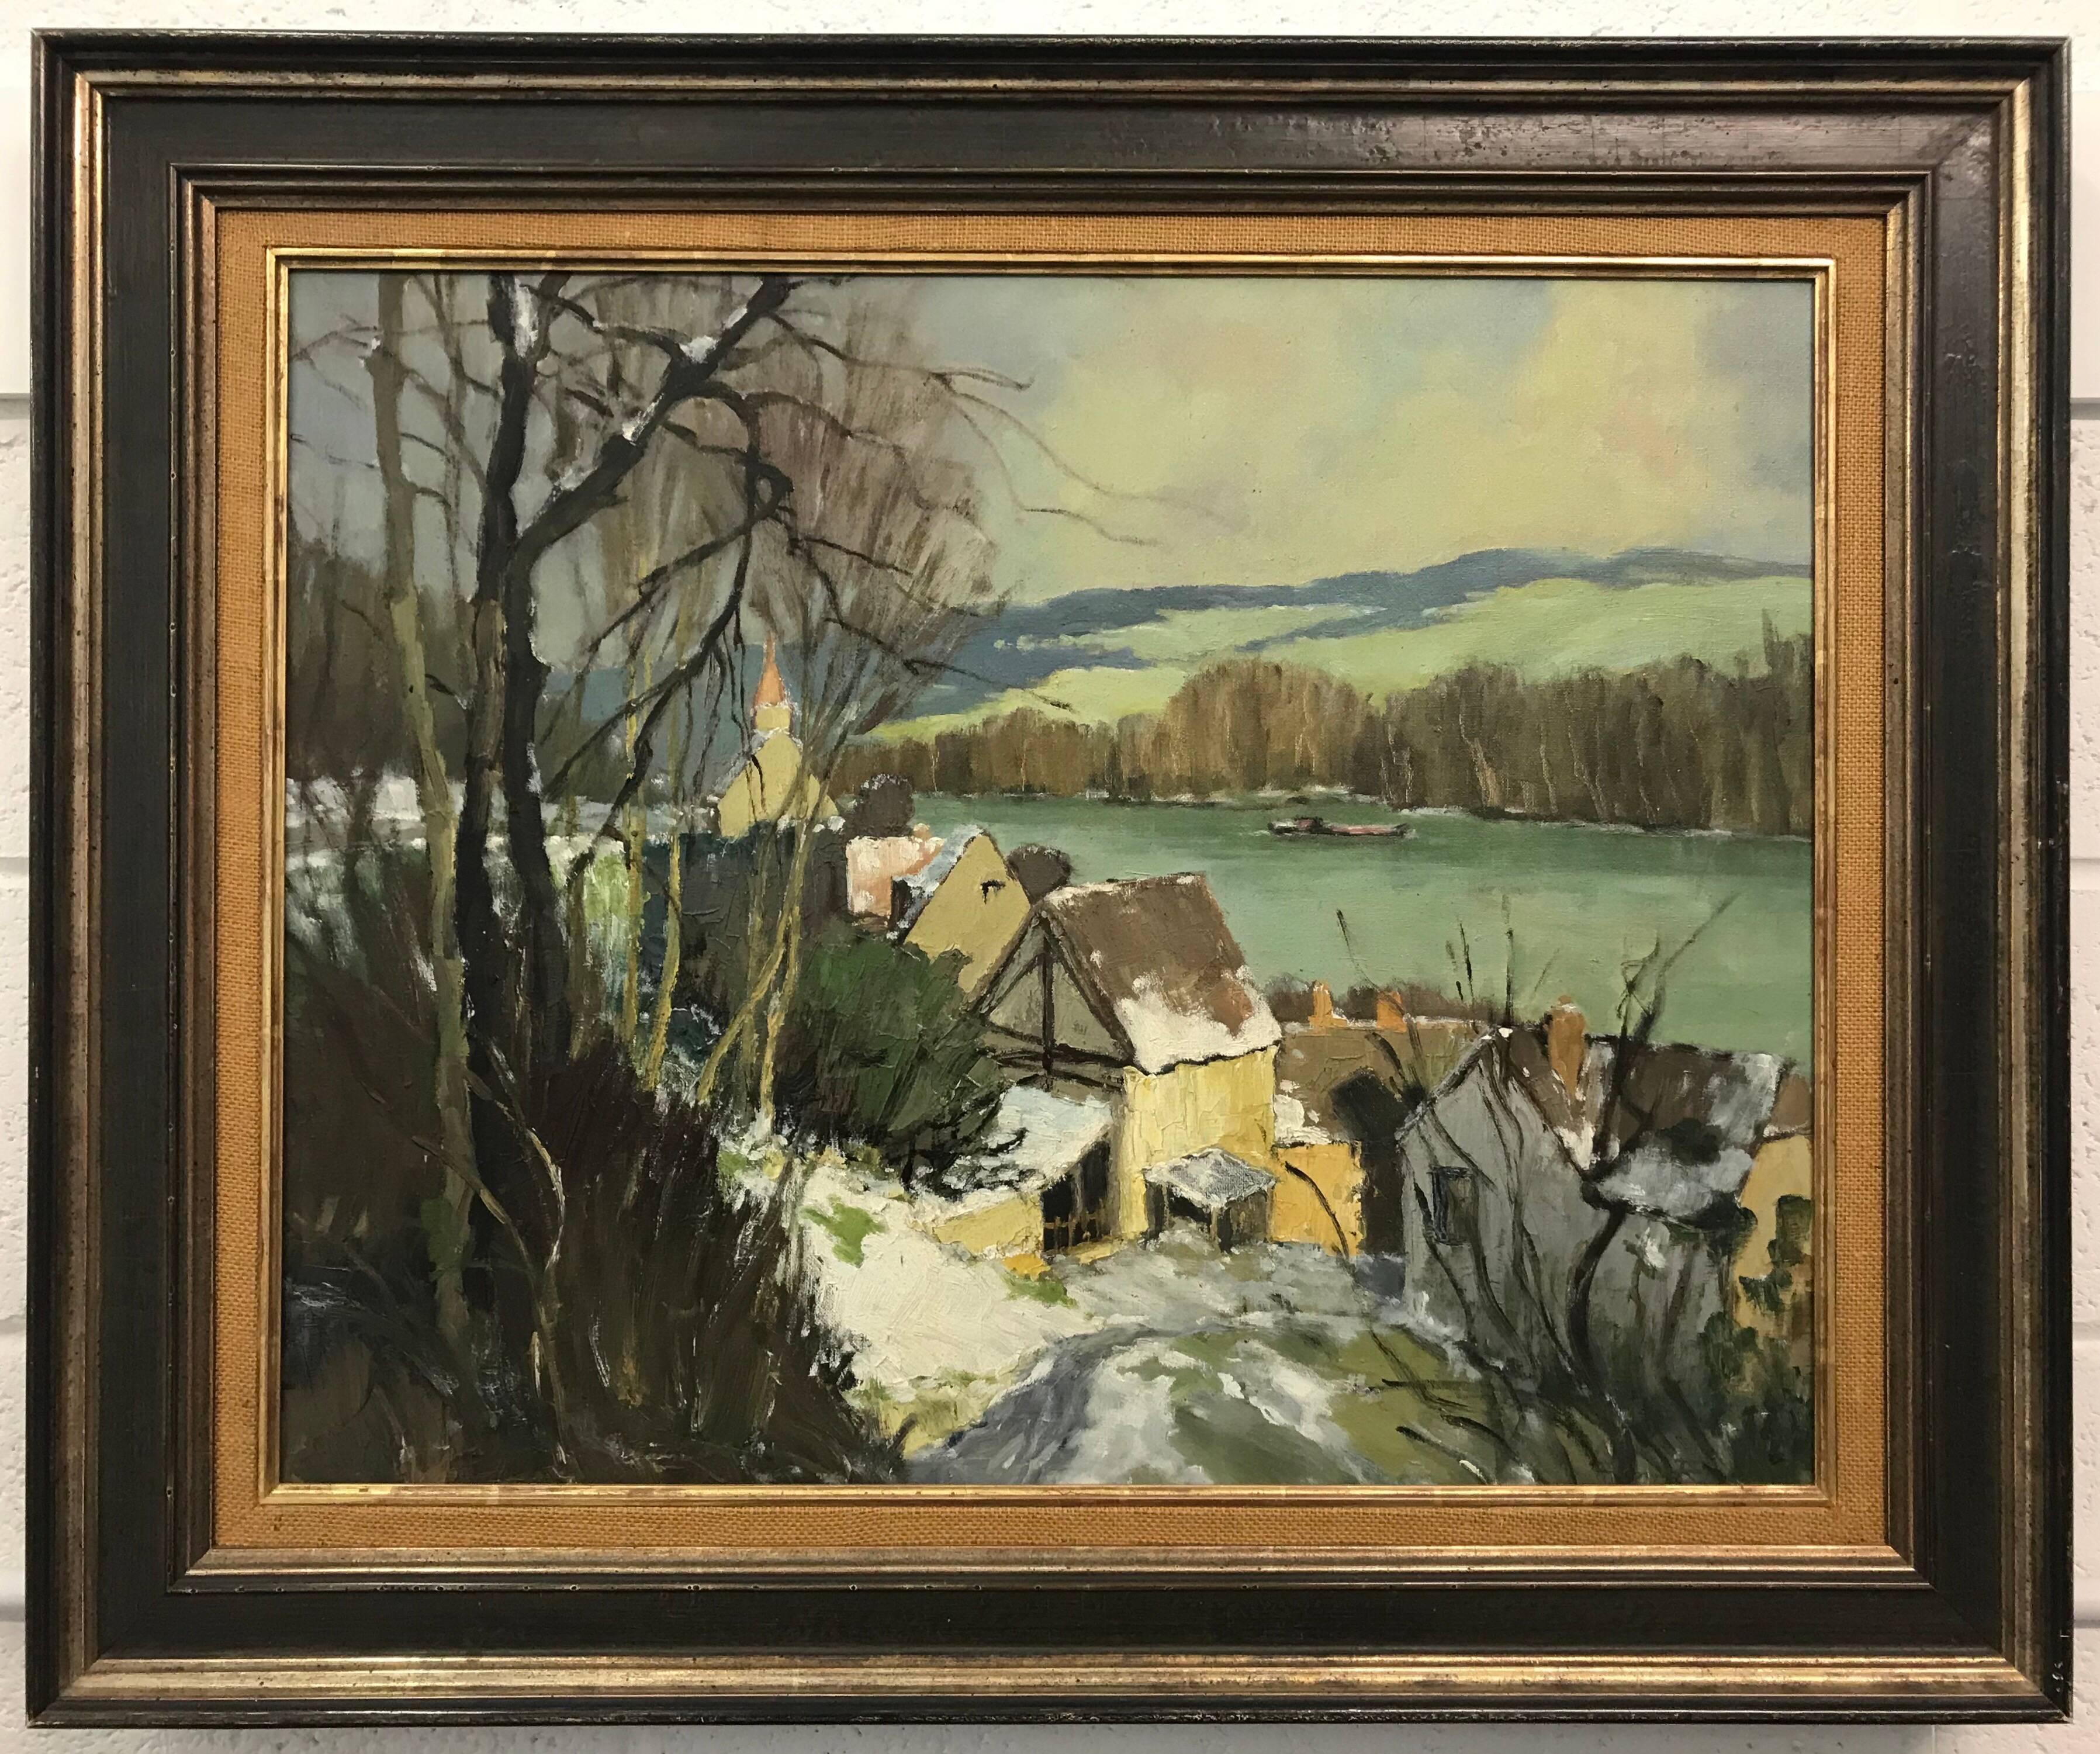 French Landscape Impressionistic Riverscape Painting by Modern French Artist, Georges Charles Robin (1903-2003). View of the River Seine, France, during the snow melt. Oil on Canvas, Signed on the lower right (faintly). Presented in an authentic